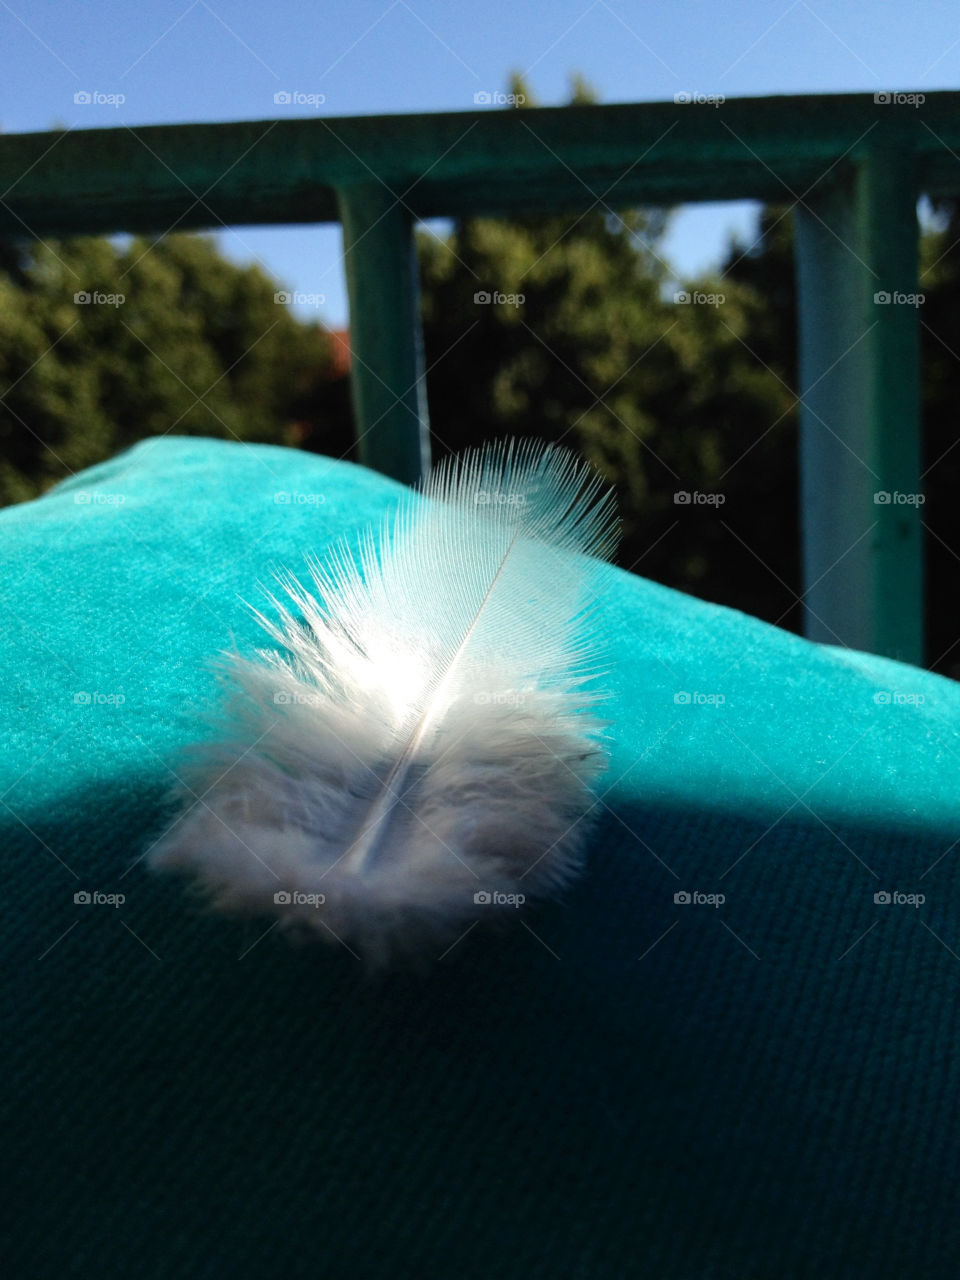 white sunny bird feather by cabday